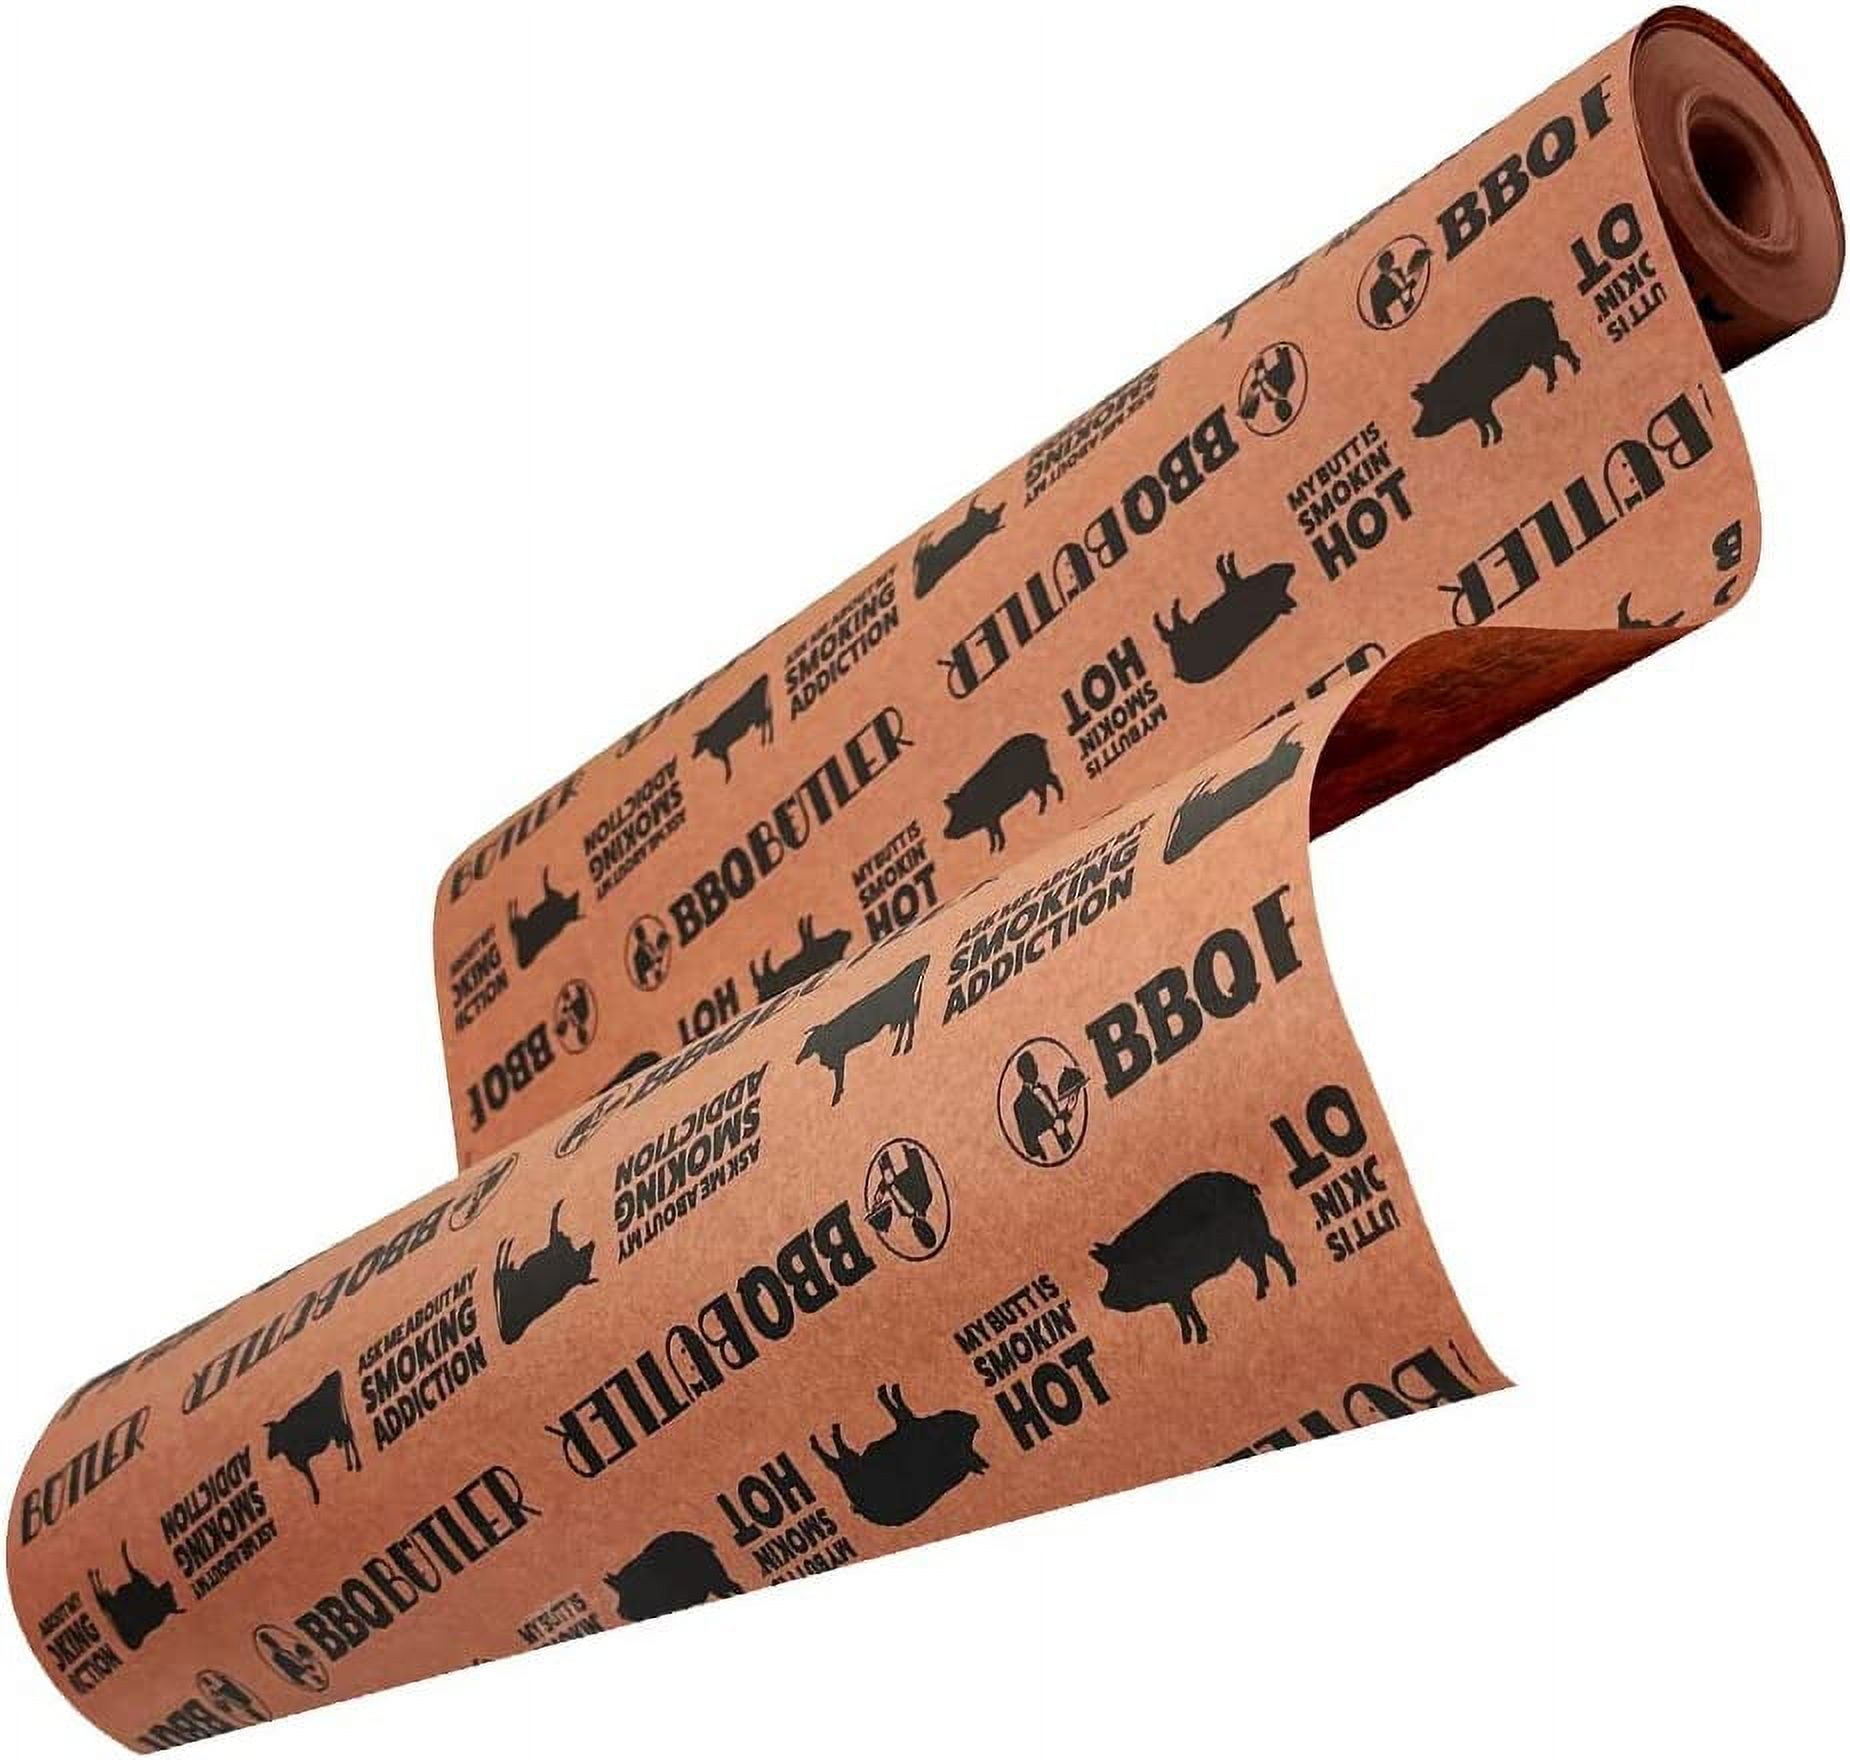 Bryco Goods Butcher Paper Roll - Peach Butcher Paper for Smoking Meat -  Ideal for Smoking Meat - Unbleached Unwaxed Uncoated Kraft Paper - Butchers